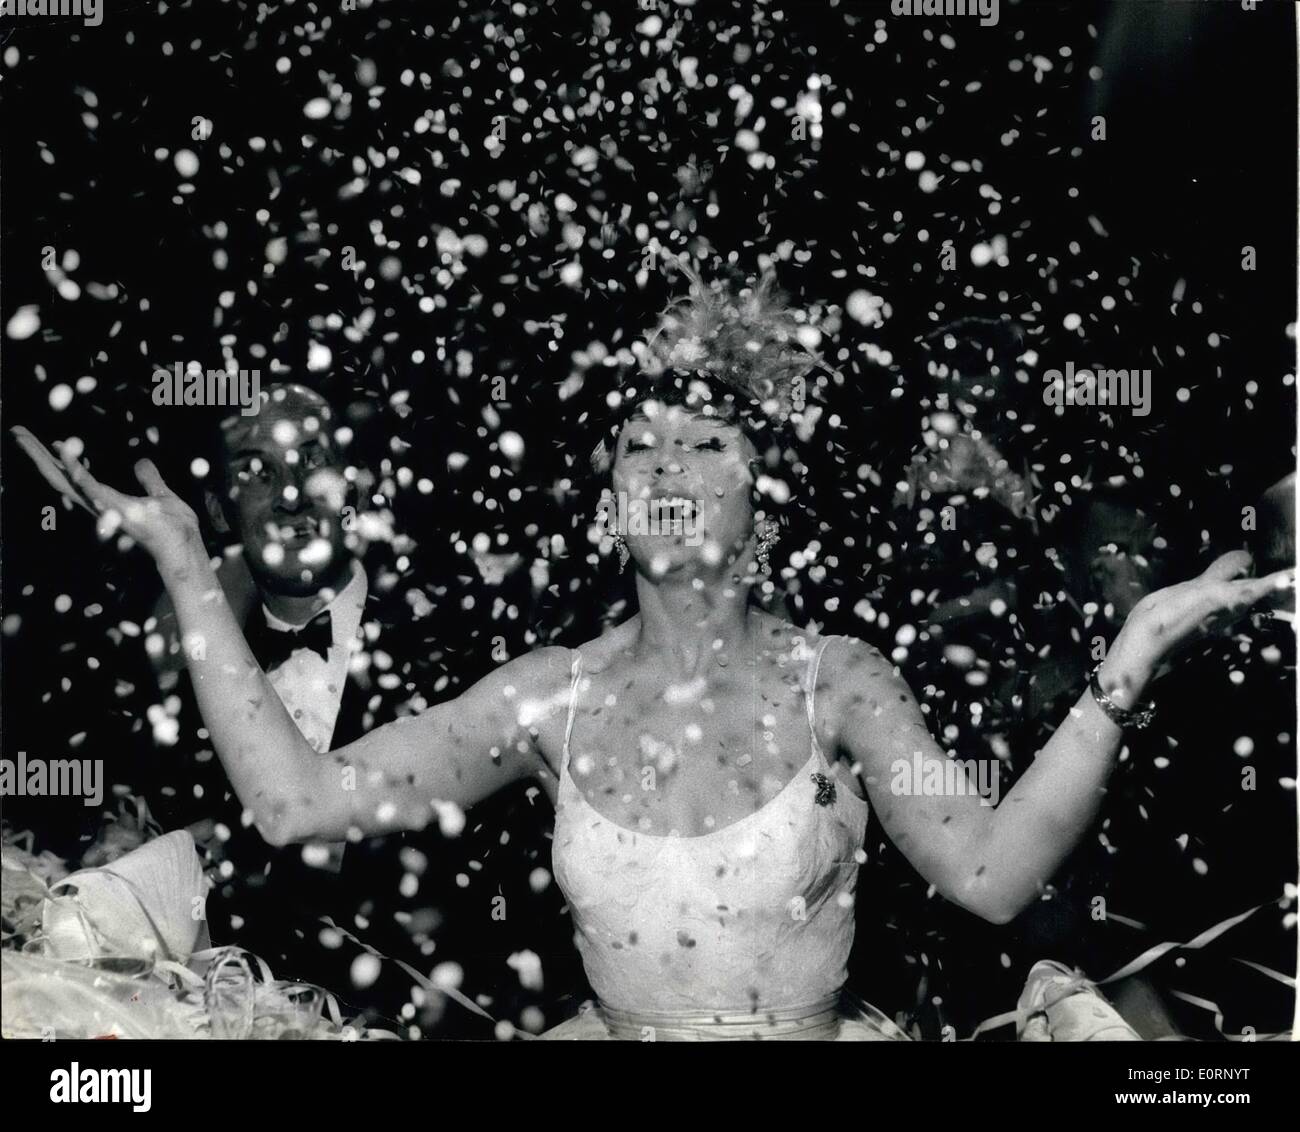 Feb. 02, 1960 - The Annual Estoril Carnival. Dawn Addams Showers Confetti: Many stars of the sen world are now taking part in Stock Photo